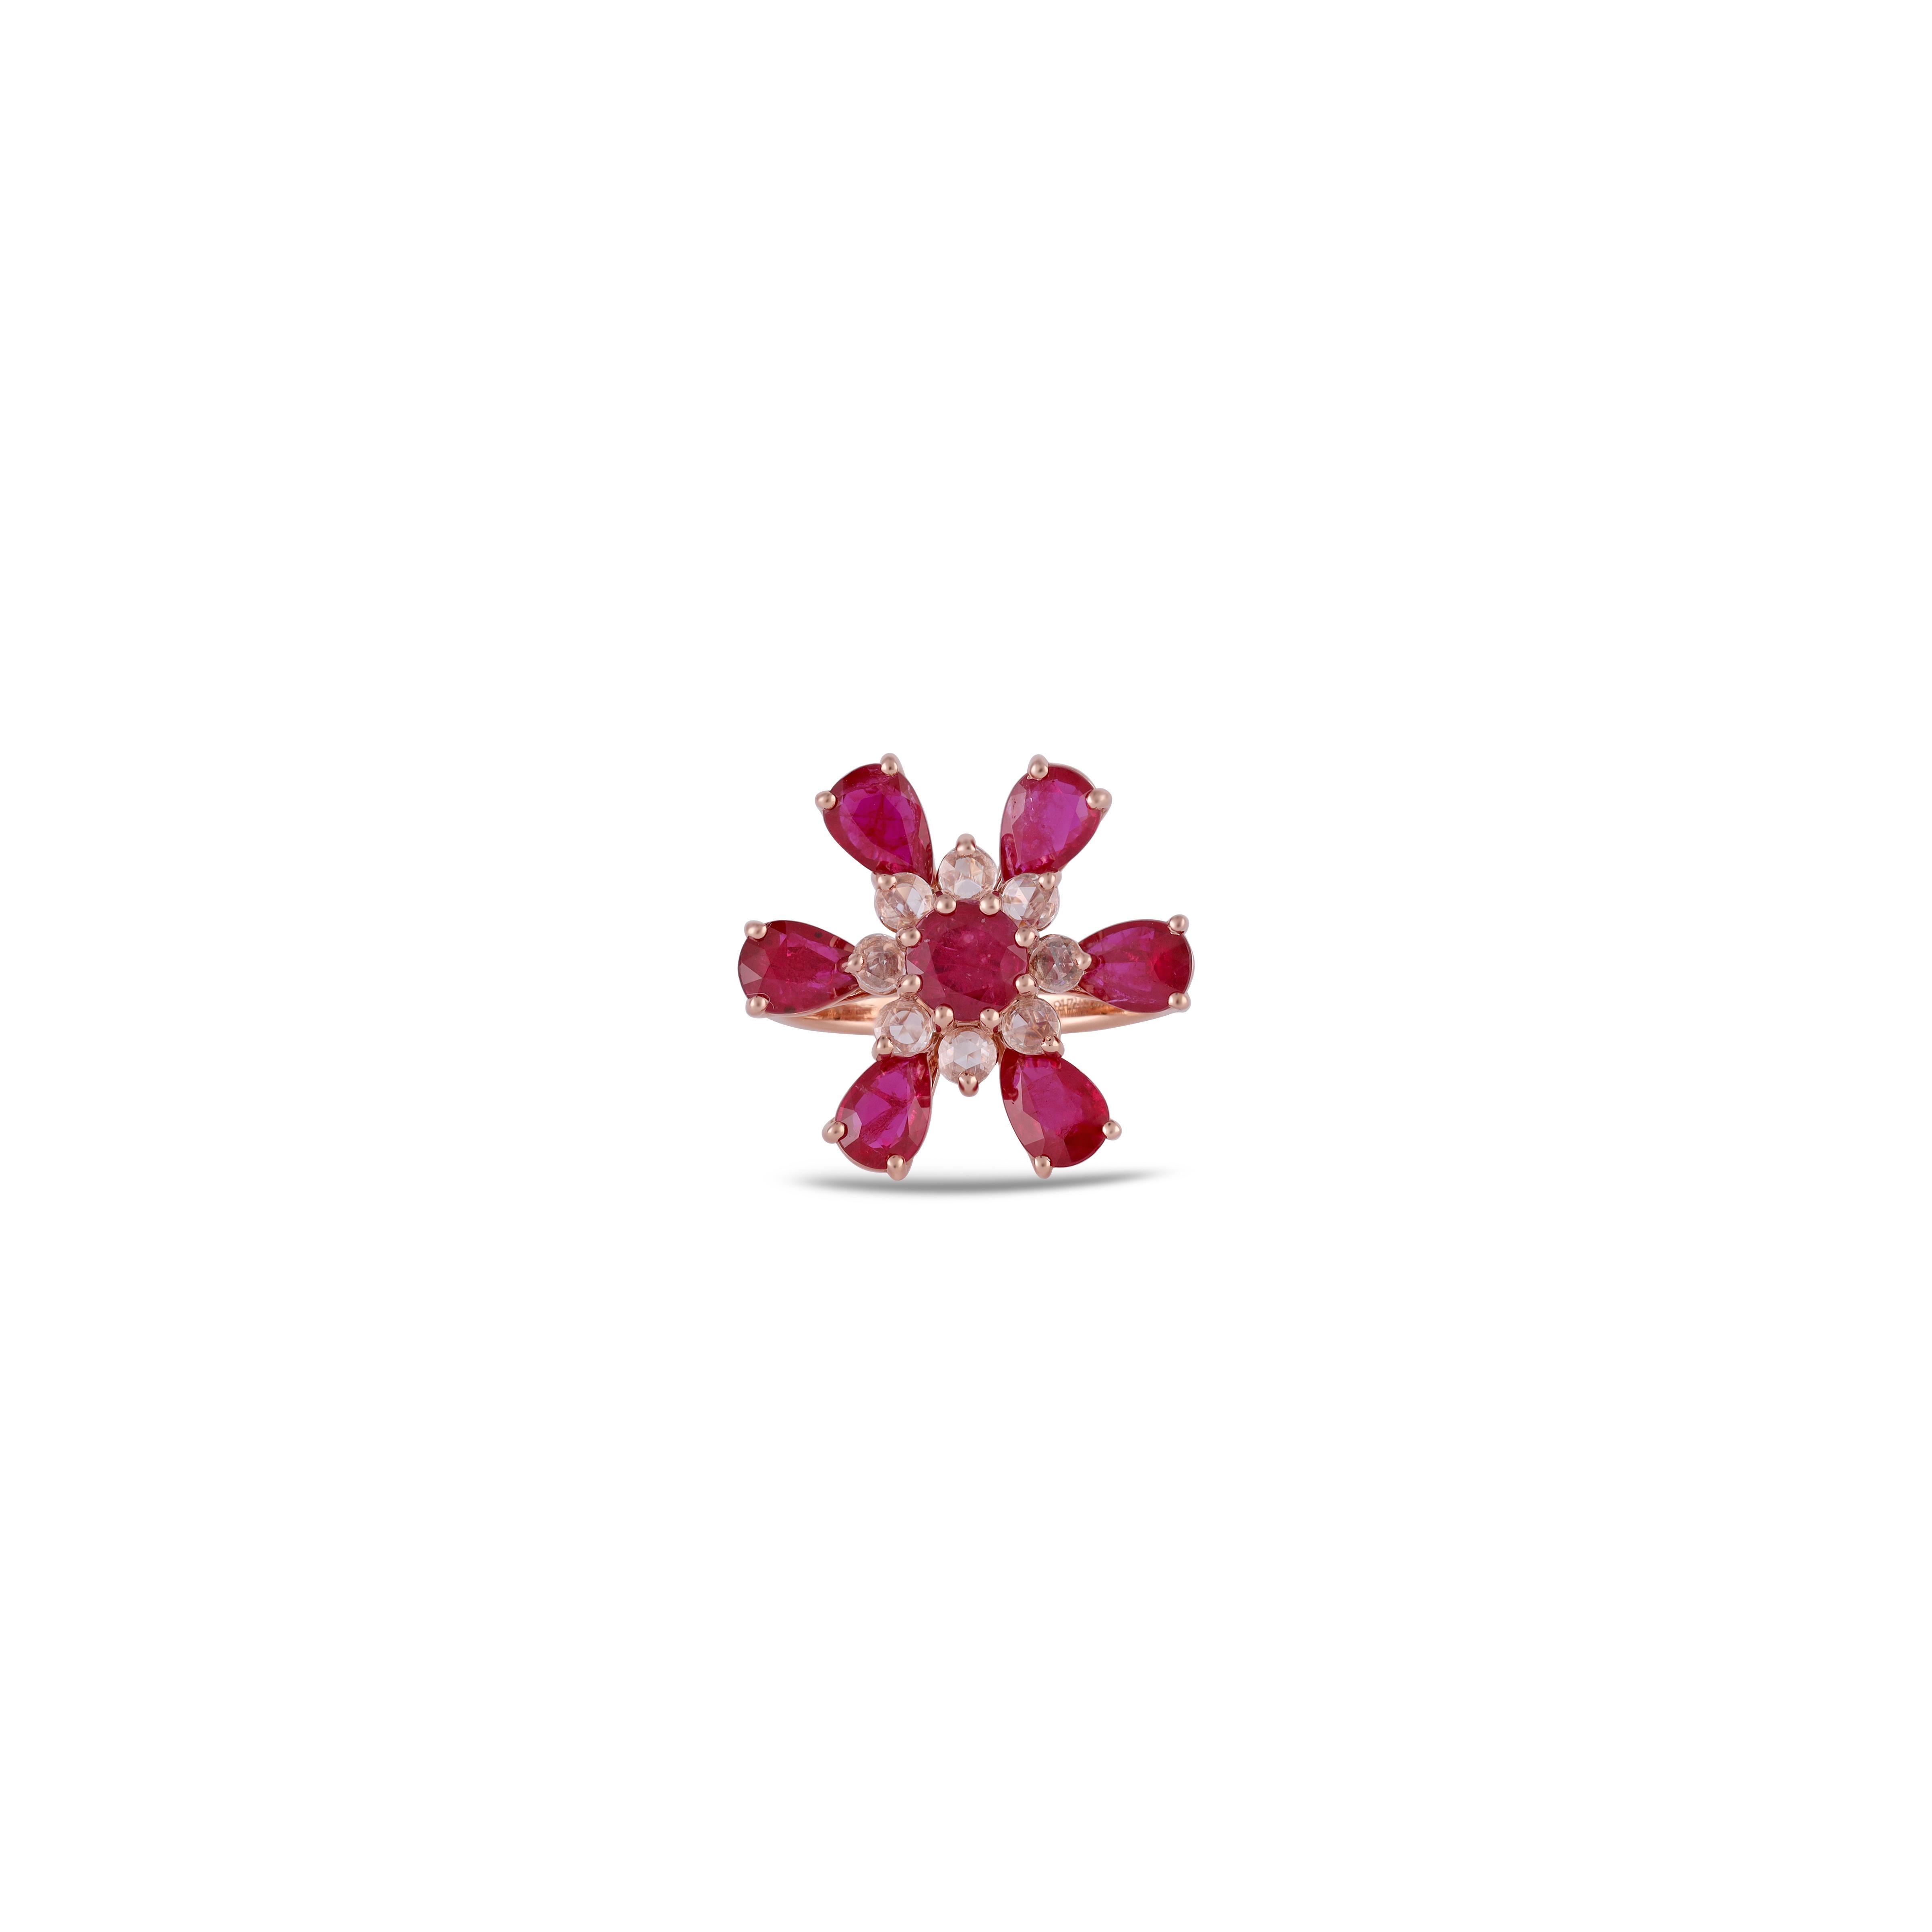 Apart of our carefully curated collection, this ring proudly displays a 2.76 carat Mozambique ruby crowning a 18k Gold Classic Ring. The ruby's prongs hold the stone tightly but allow it to be seen in its entirety. The center stone is surrounded by